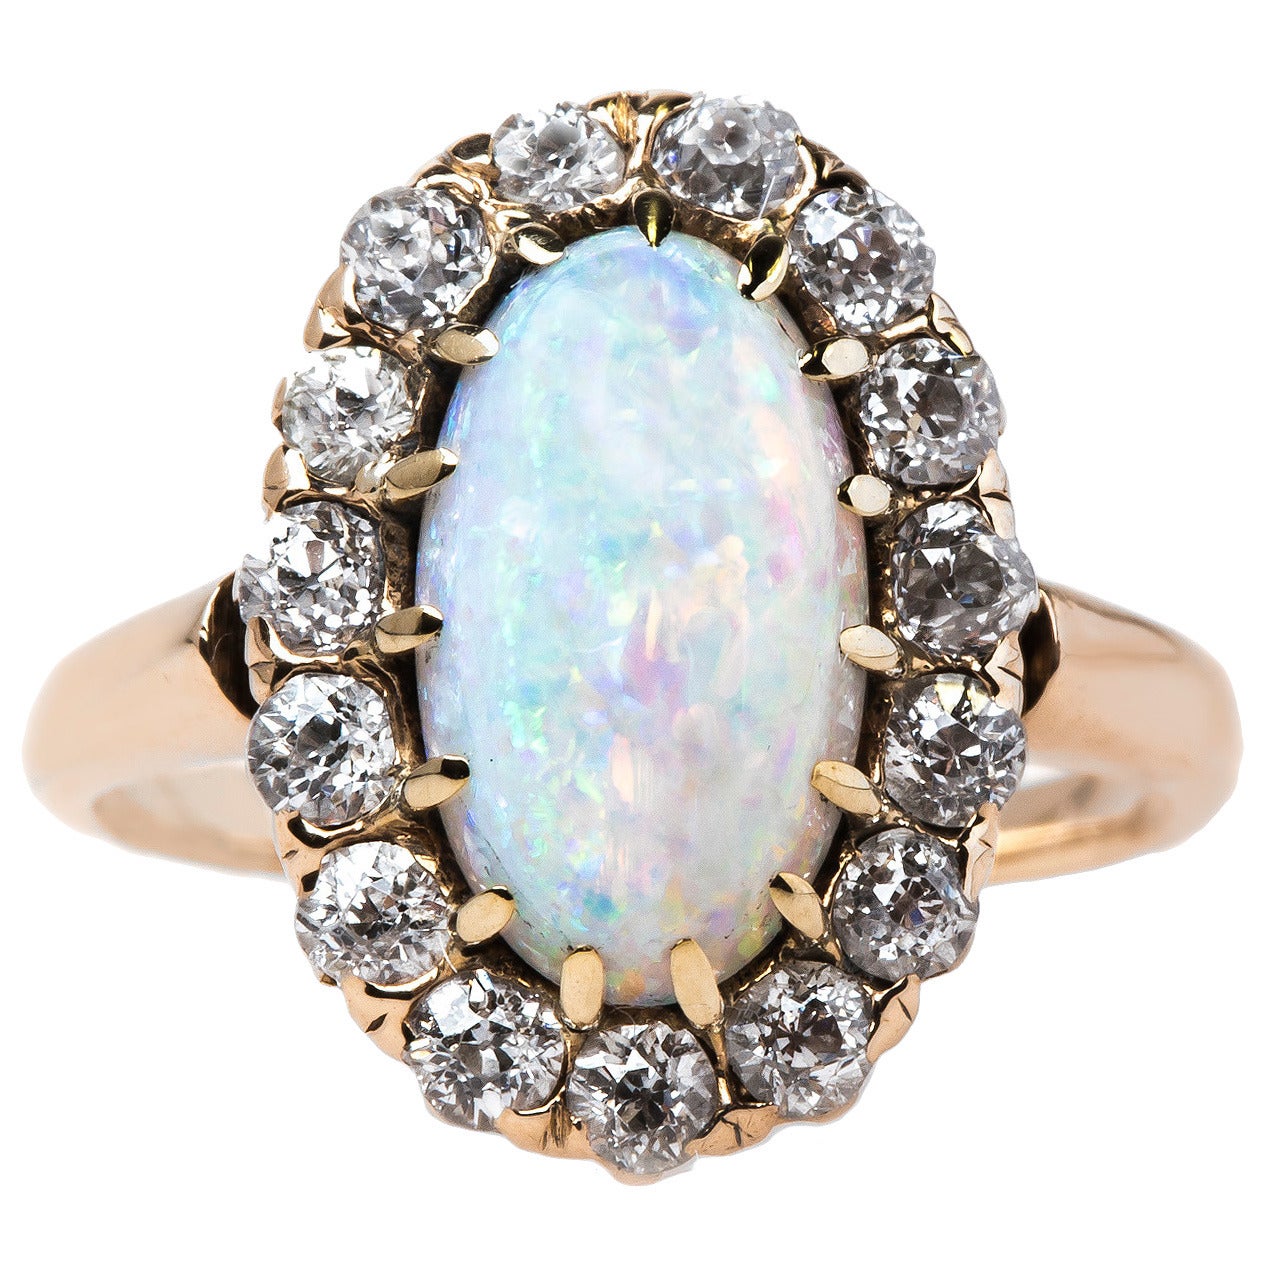 Alluring Victorian Era Oval Opal Engagement Ring with Diamond Halo